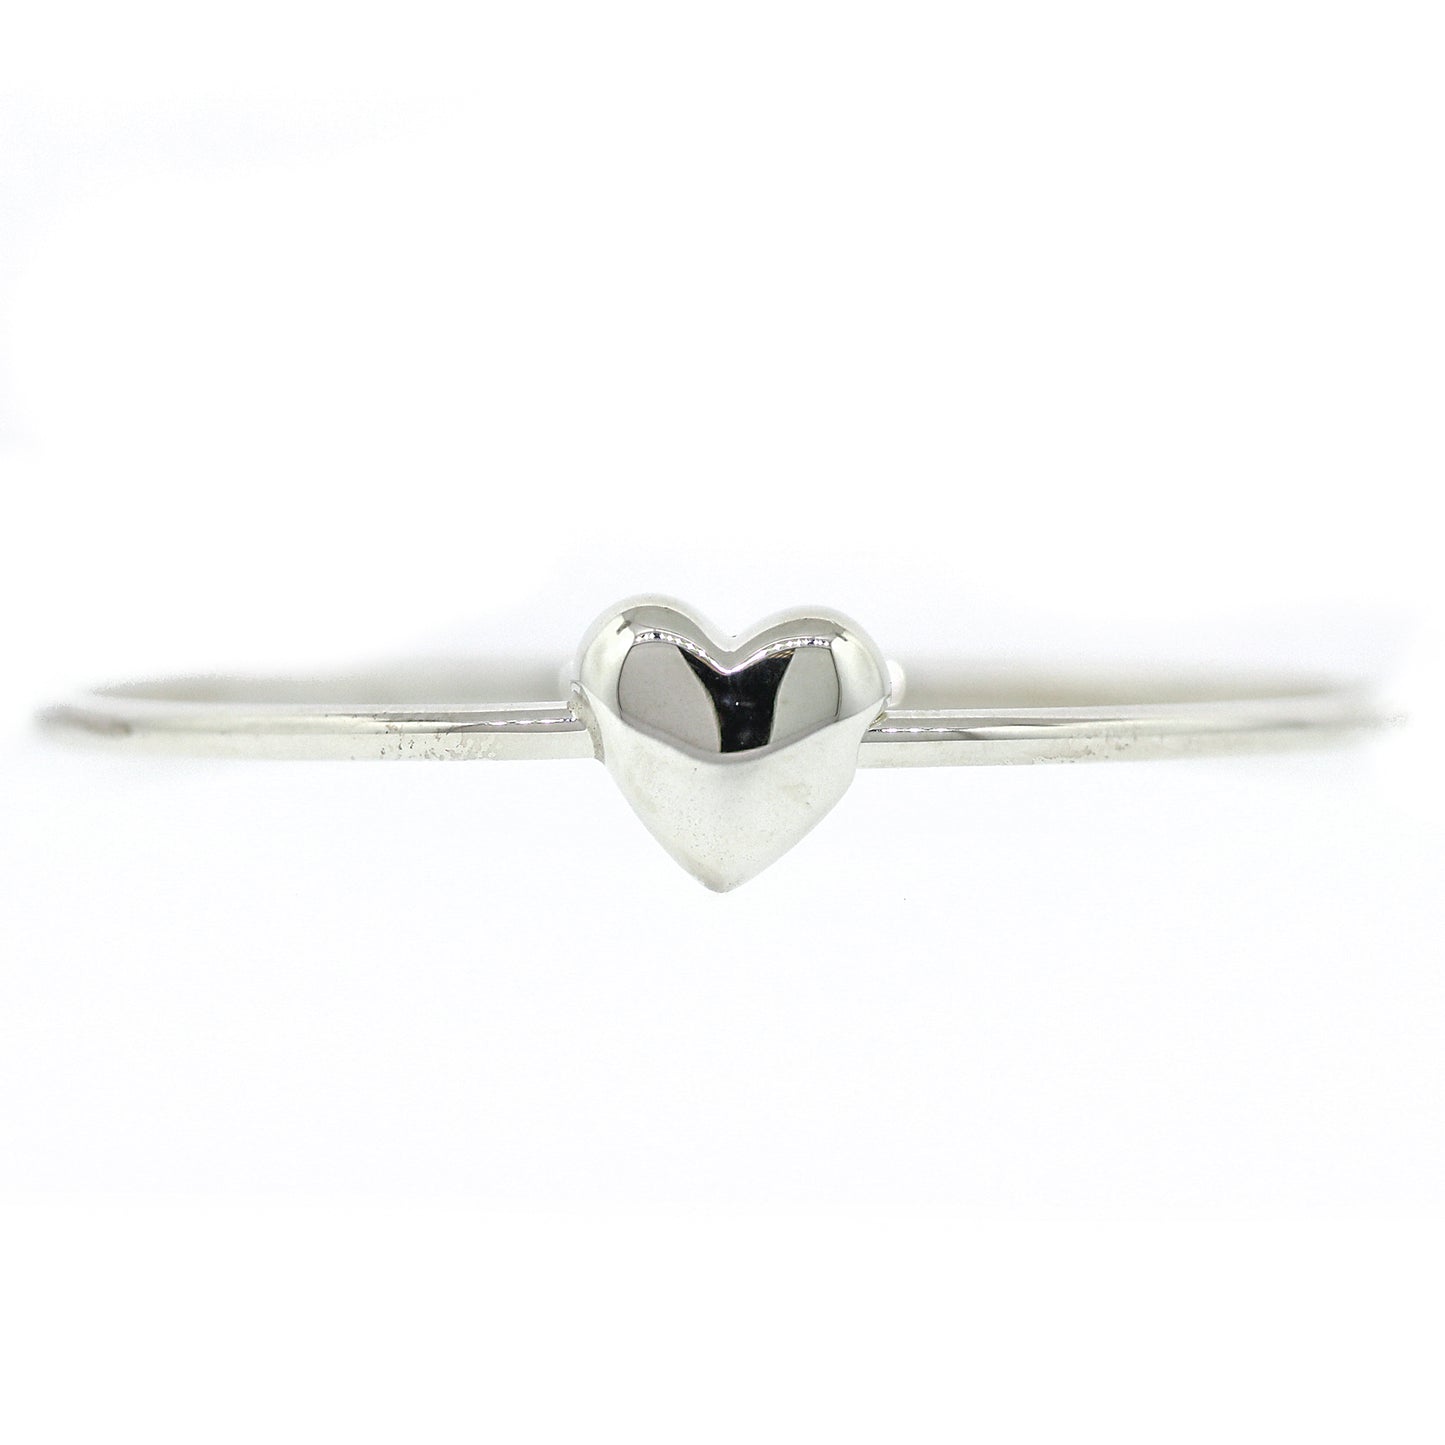 Preowned Tiffany and Co. Puffed Heart Sterling Silver Wire Bangle Bracelet